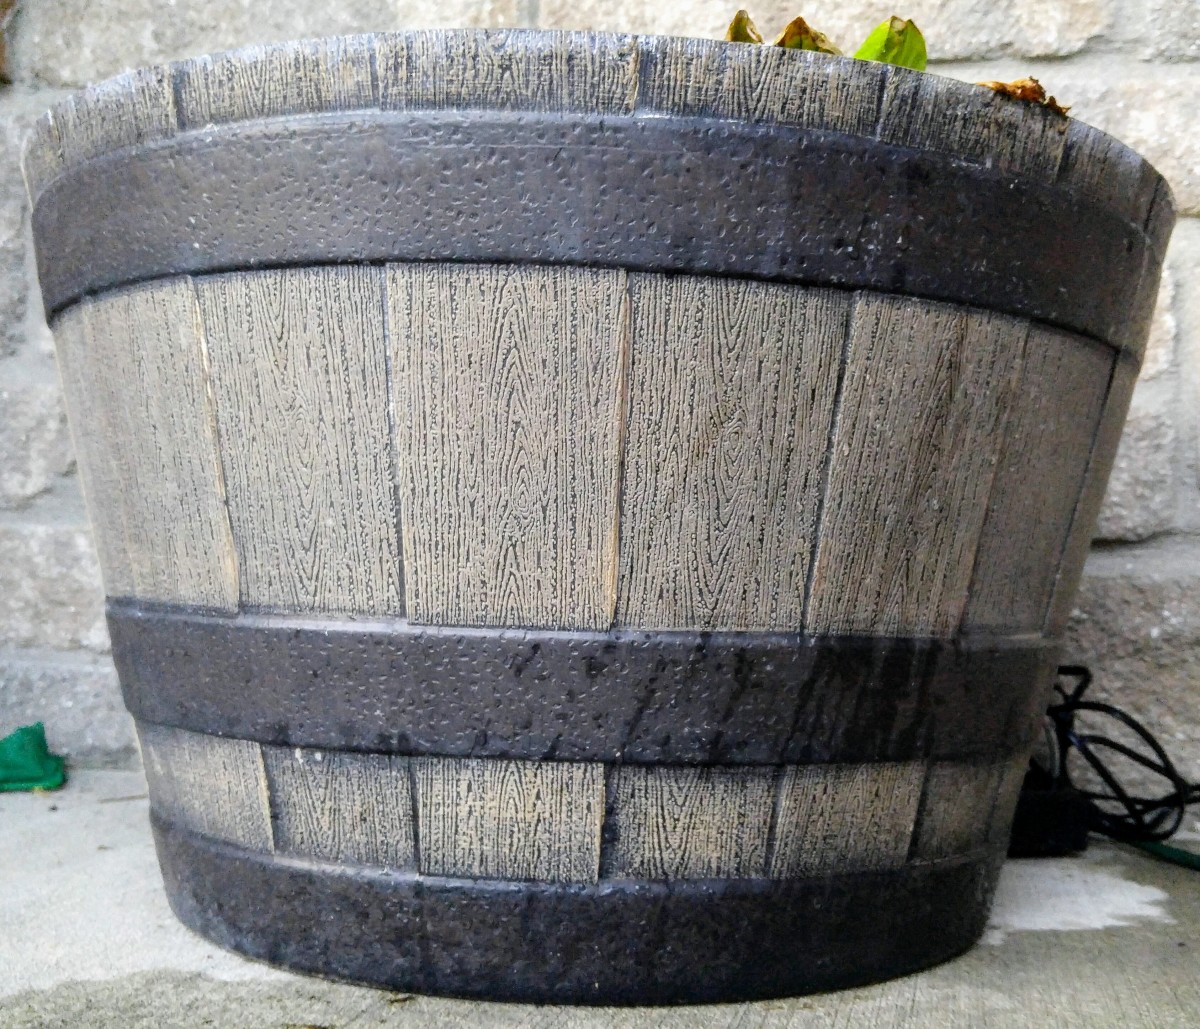 This half whiskey barrel is made from resin.